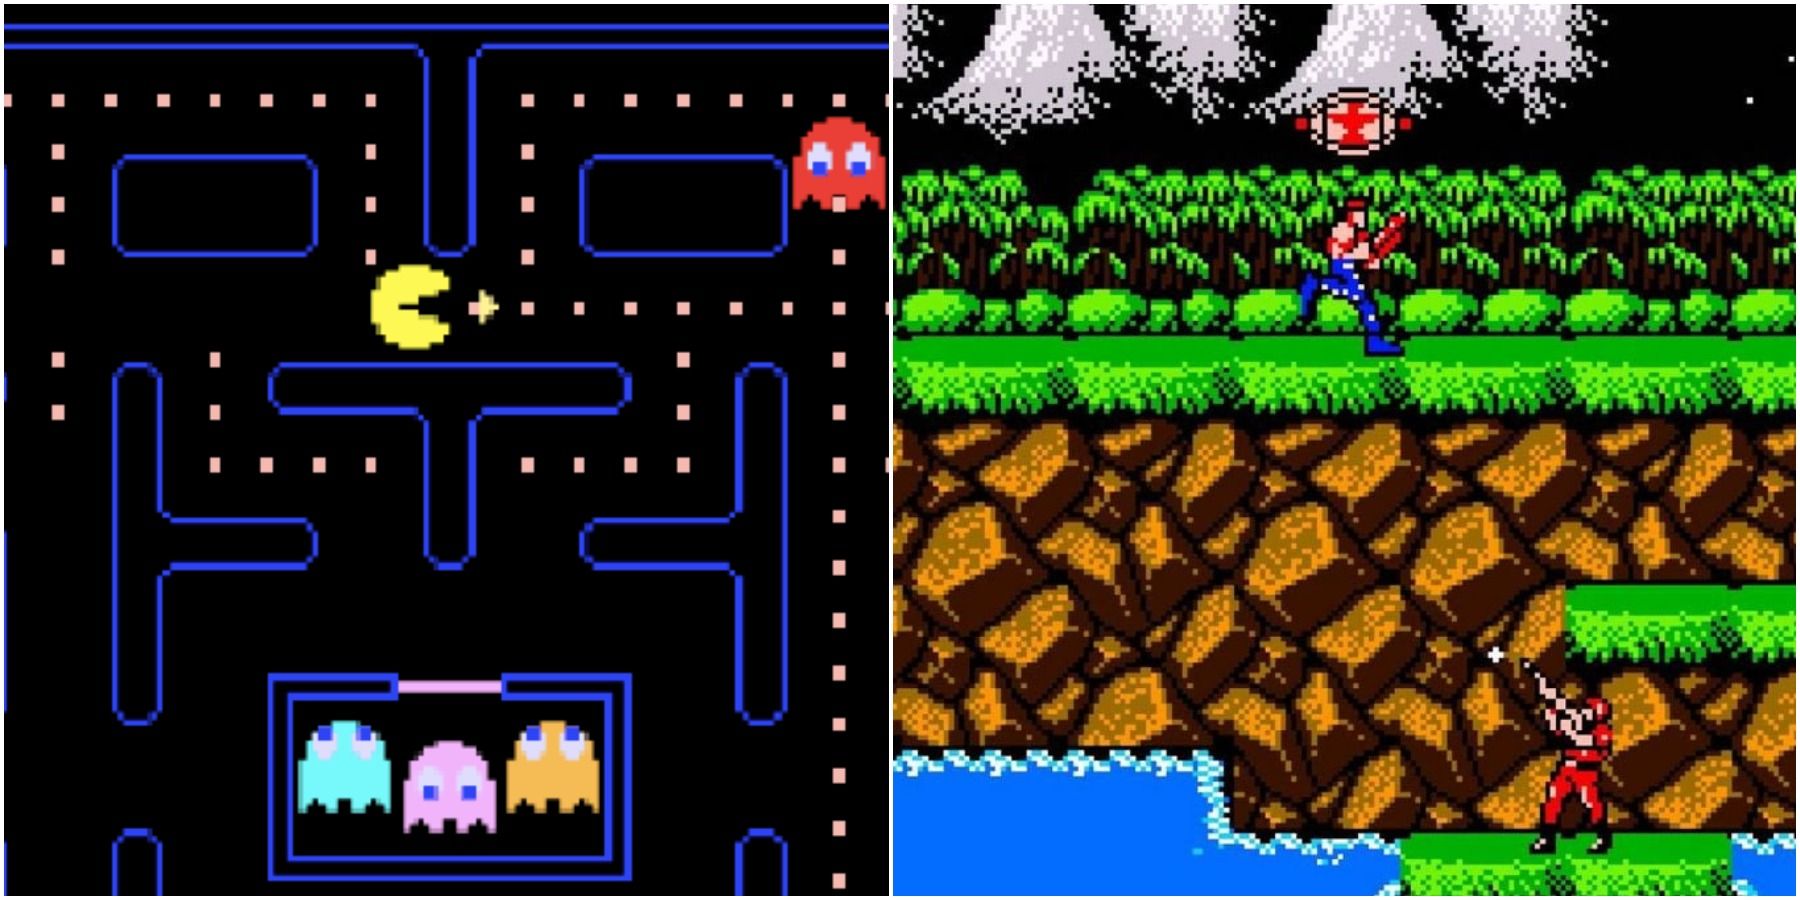 (Left) Pac-Man gameplay (Right) Contra gameplay